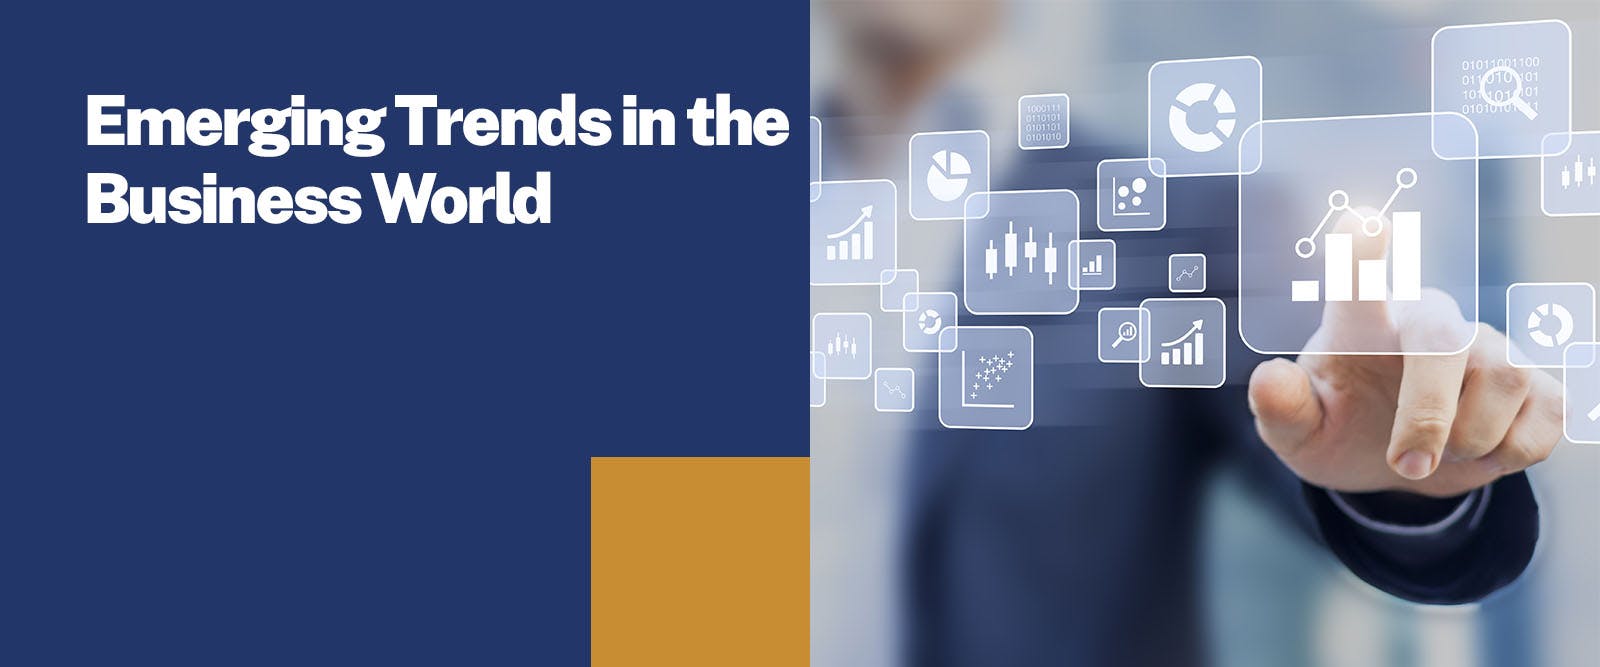 Emerging Trends in the Business World